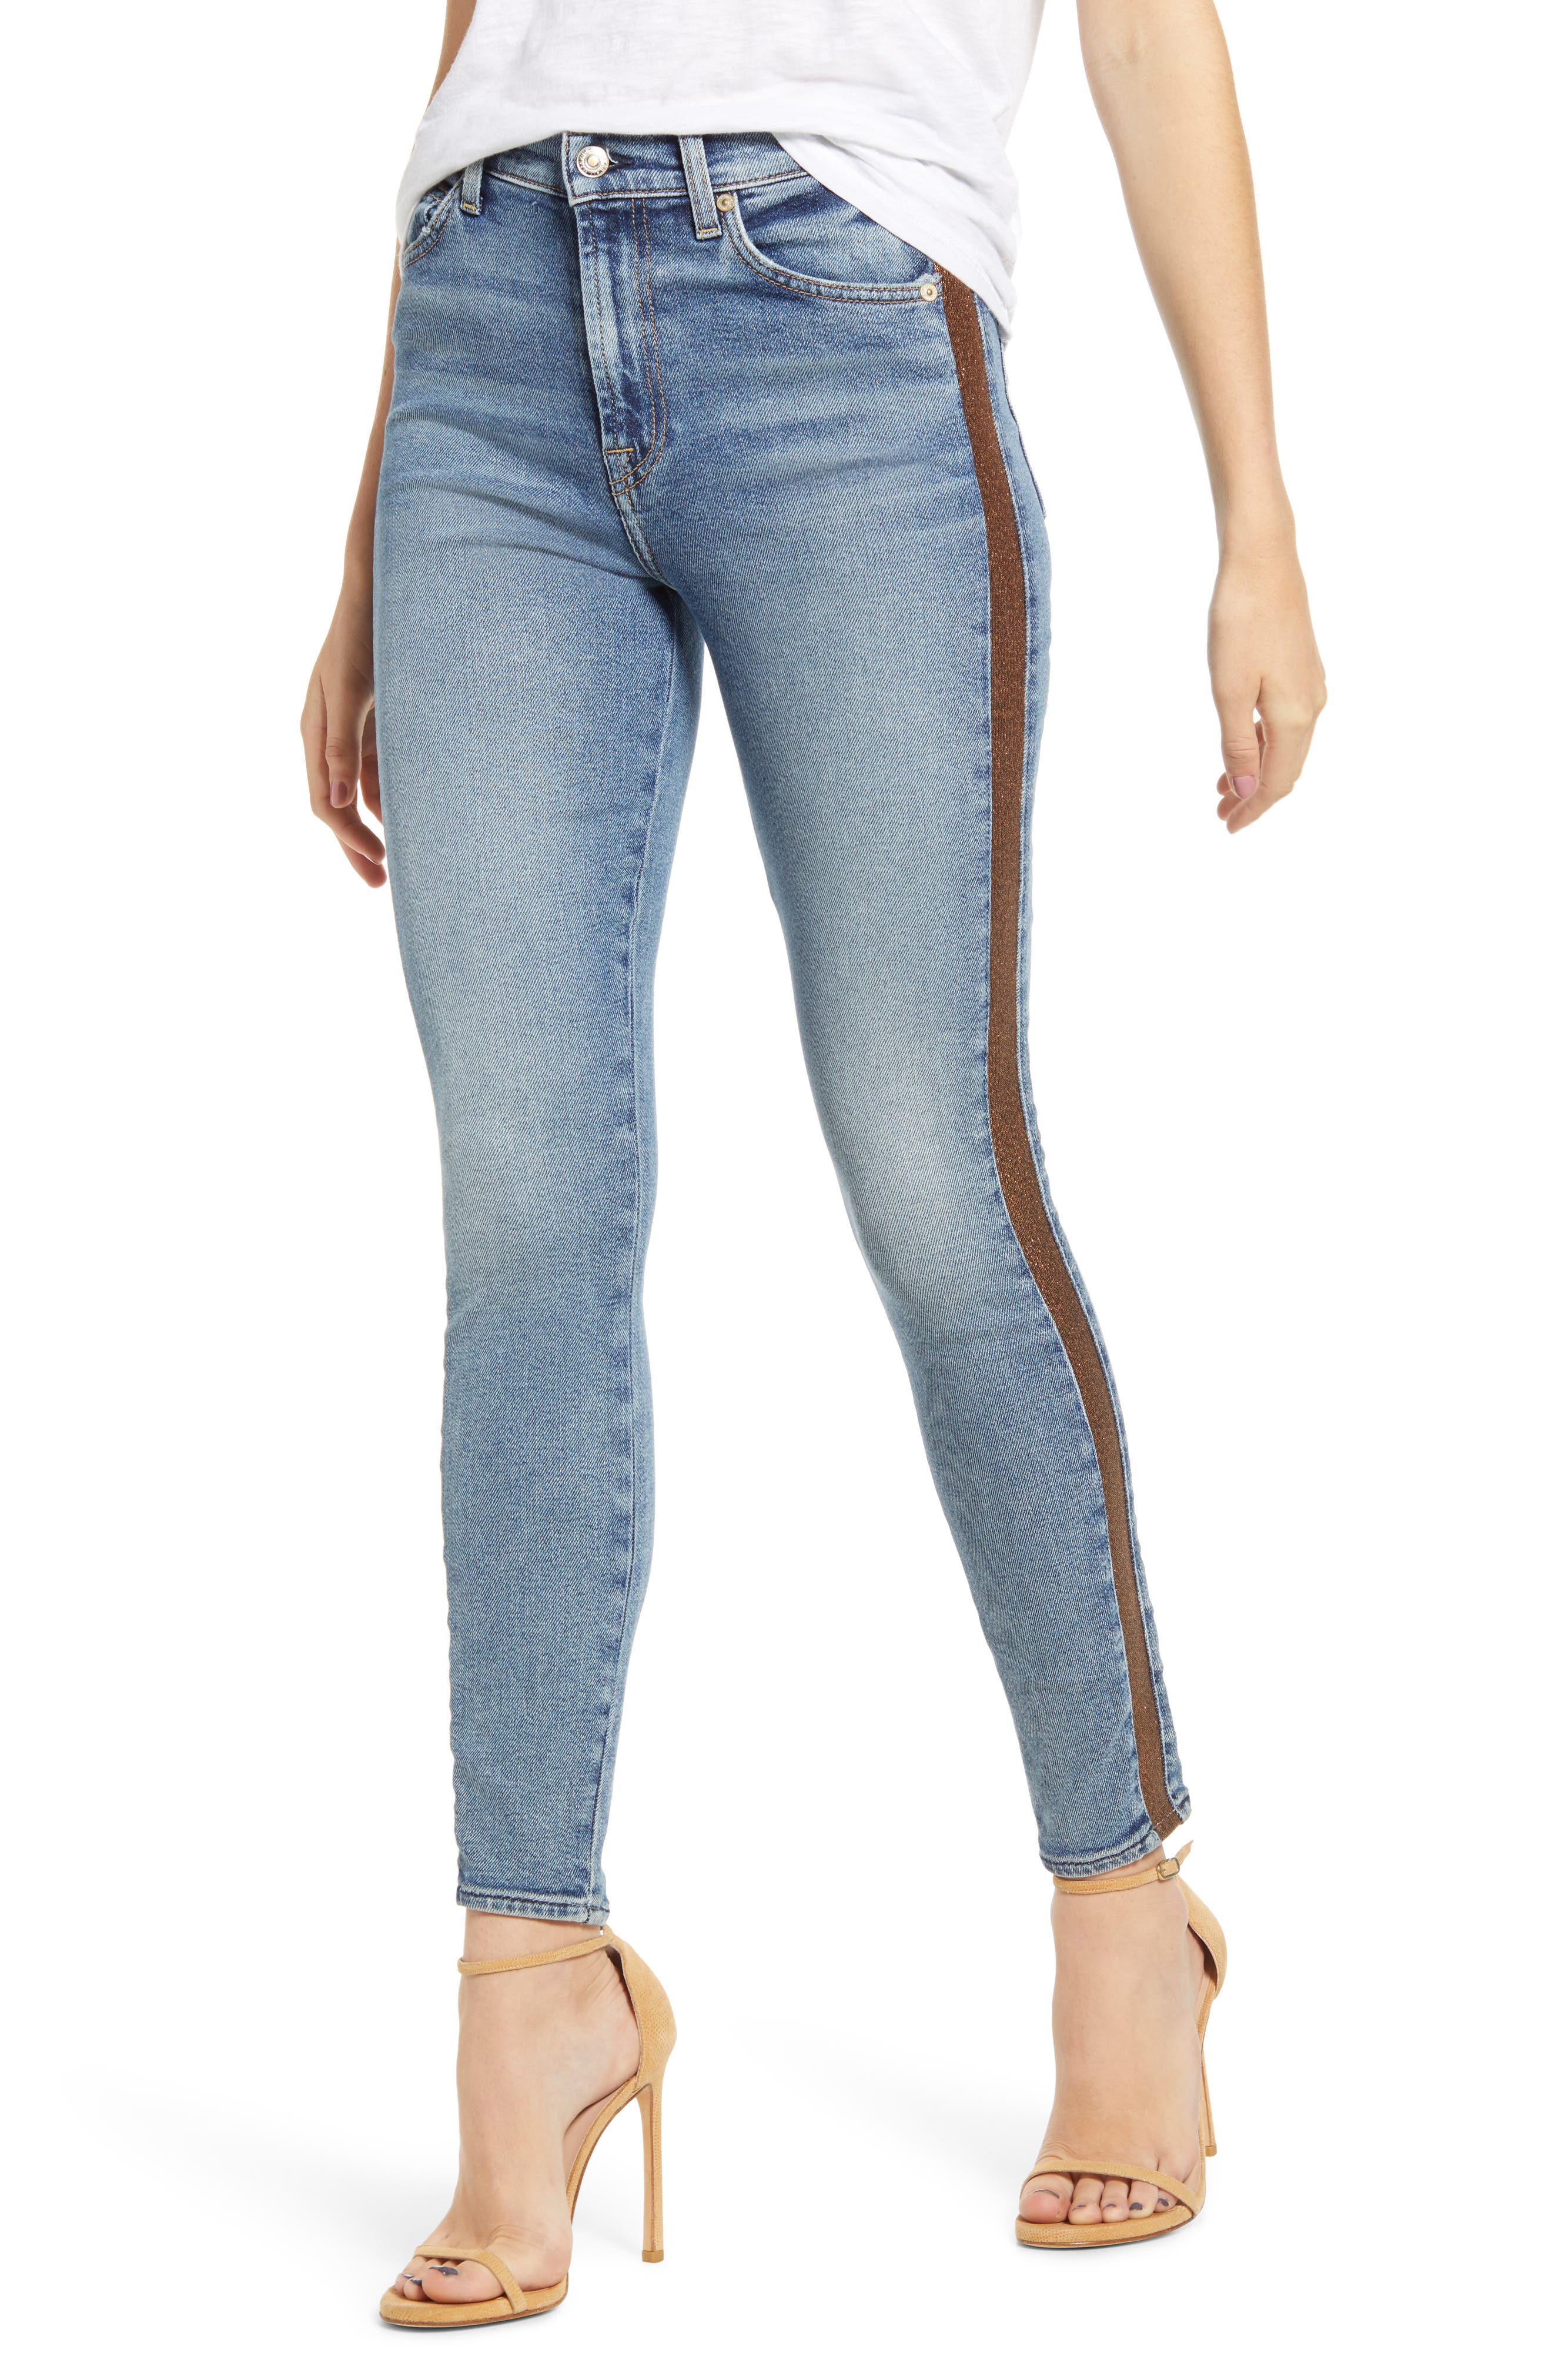 luxe vintage jeans